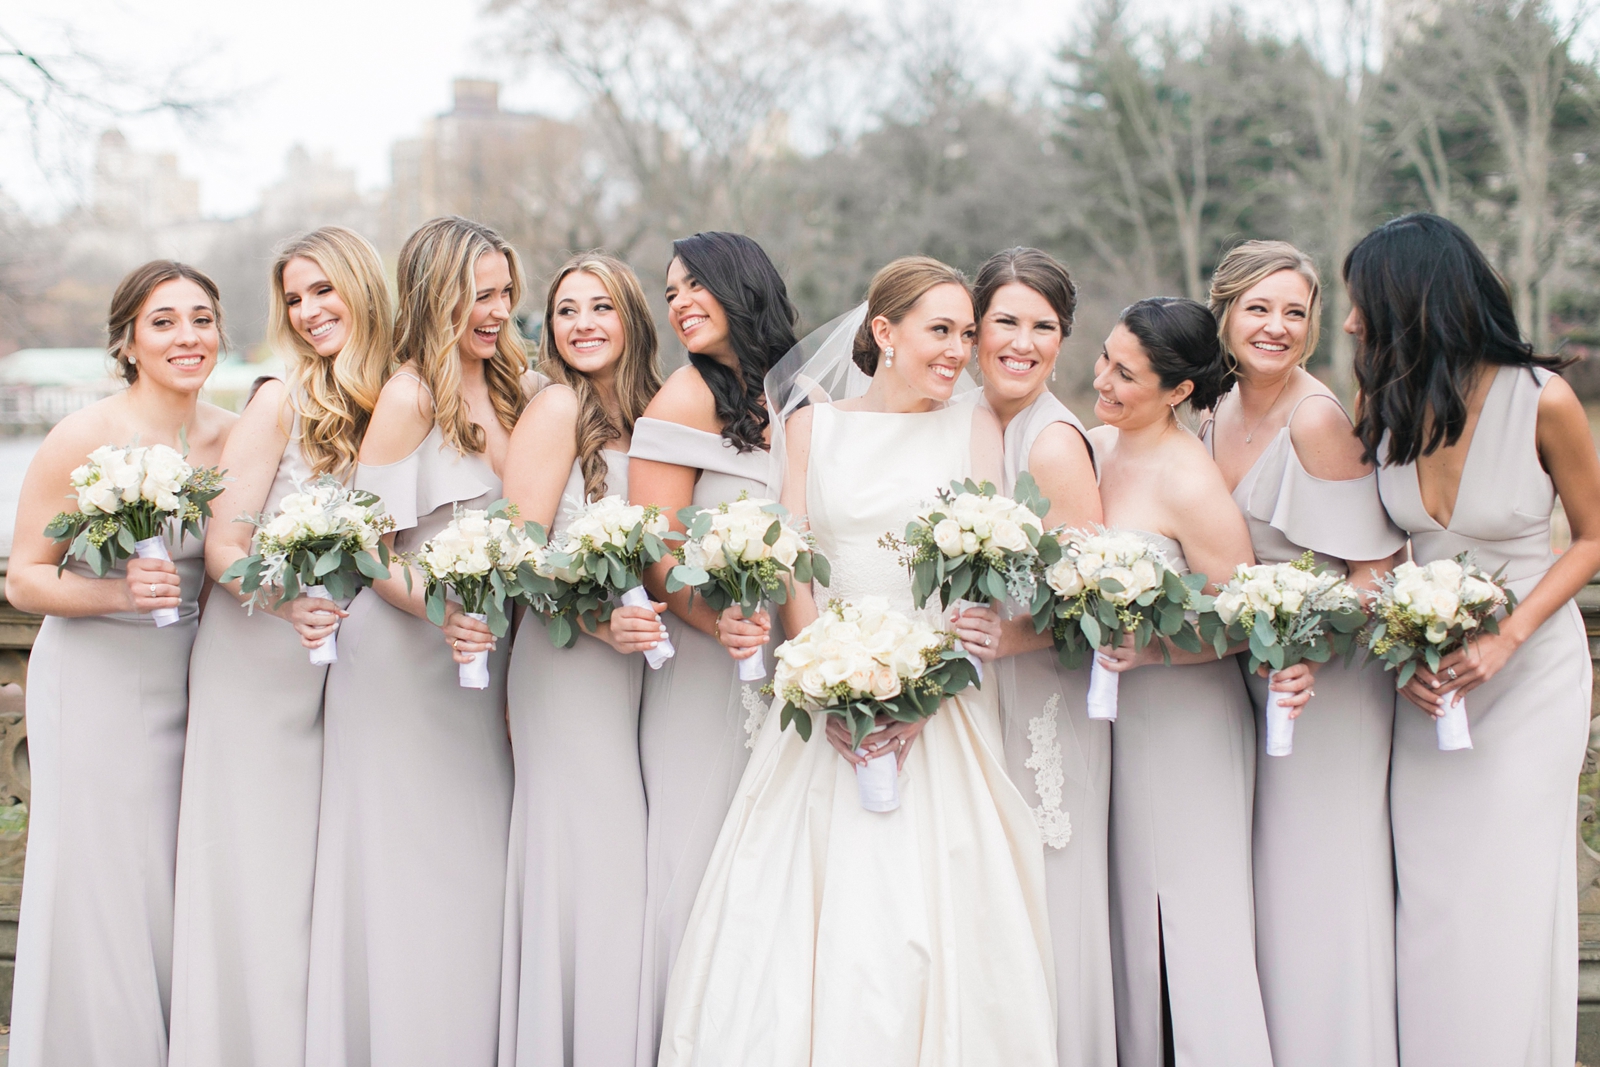 Central Park wedding photo with bride and bridesmaids